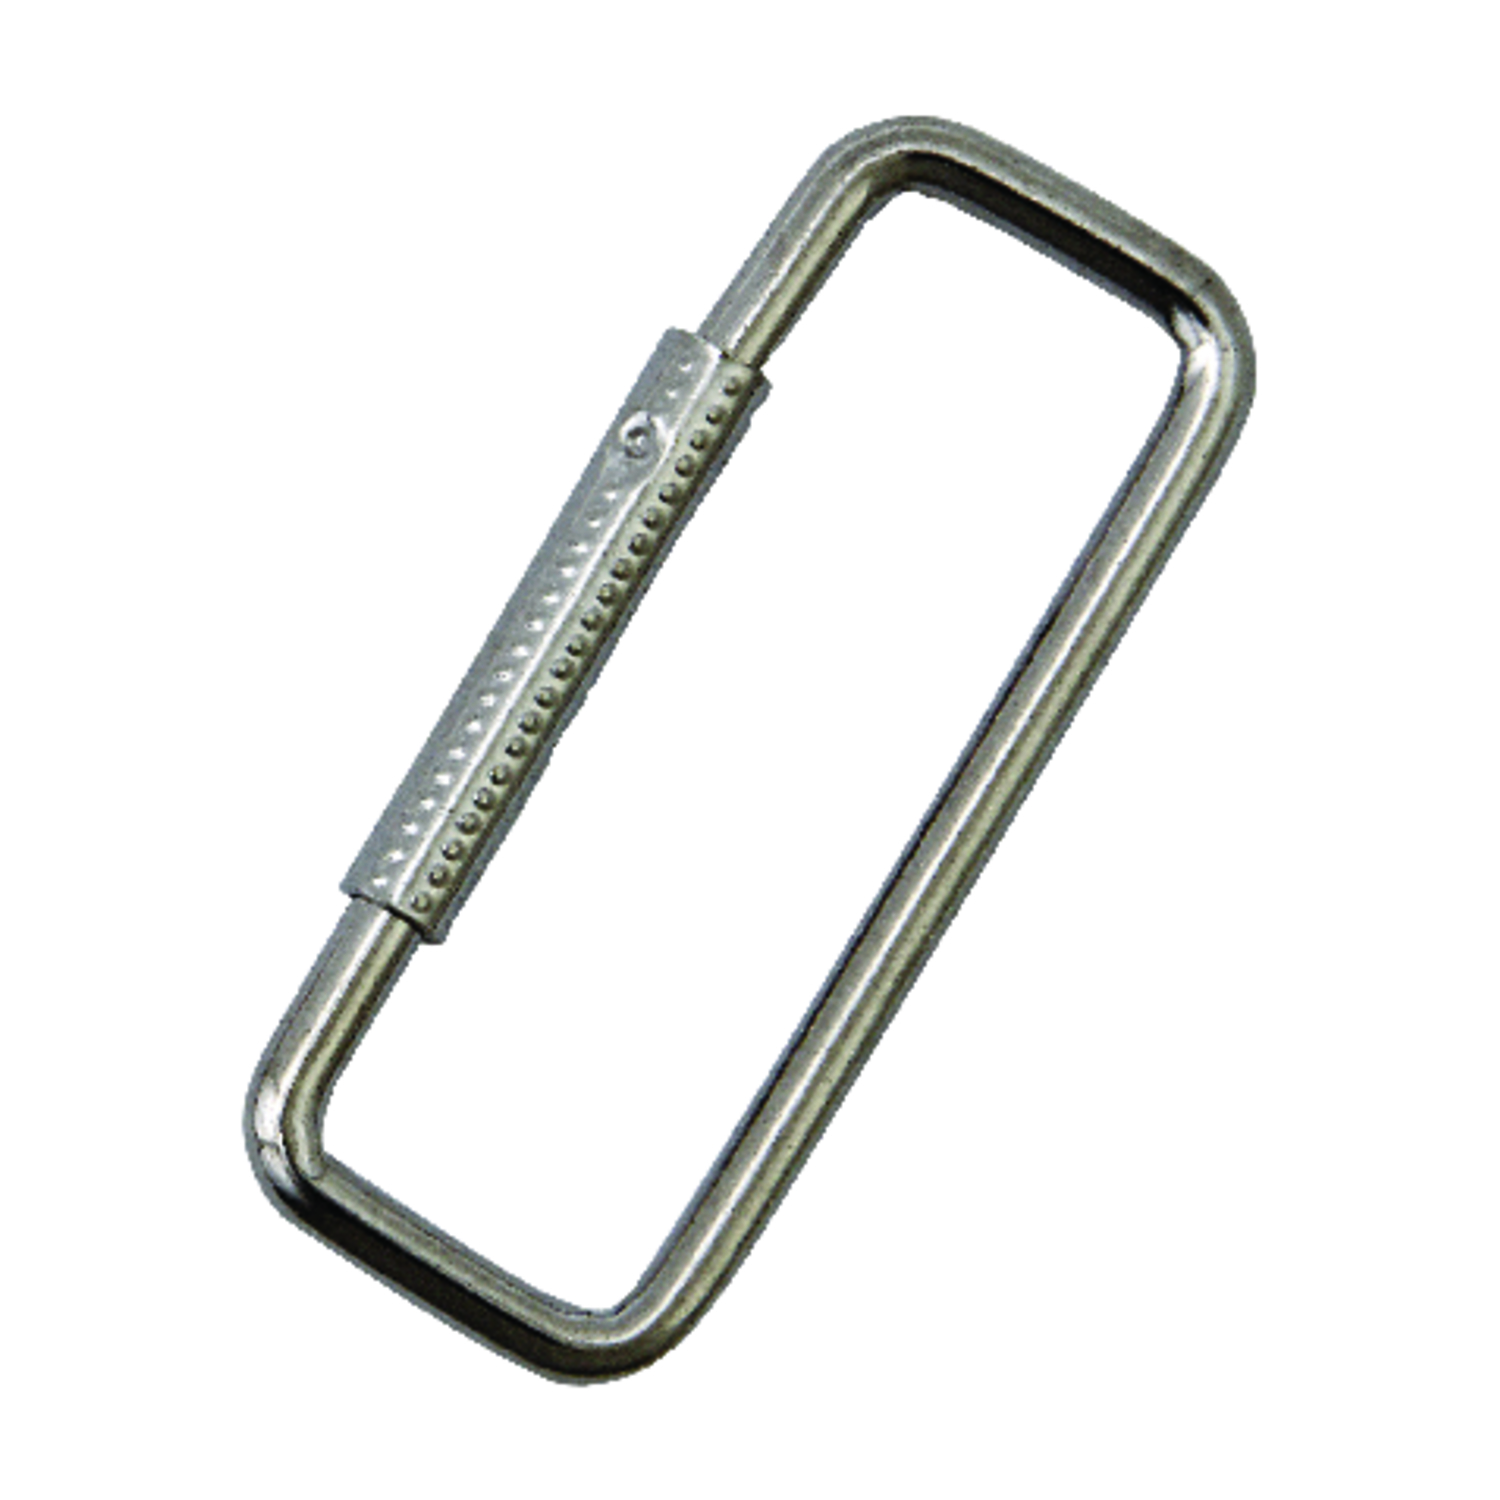 UPC 029069751128 product image for Hy-Ko 3/4in x 2in Spring Sleeve Key Ring (KC122) | upcitemdb.com